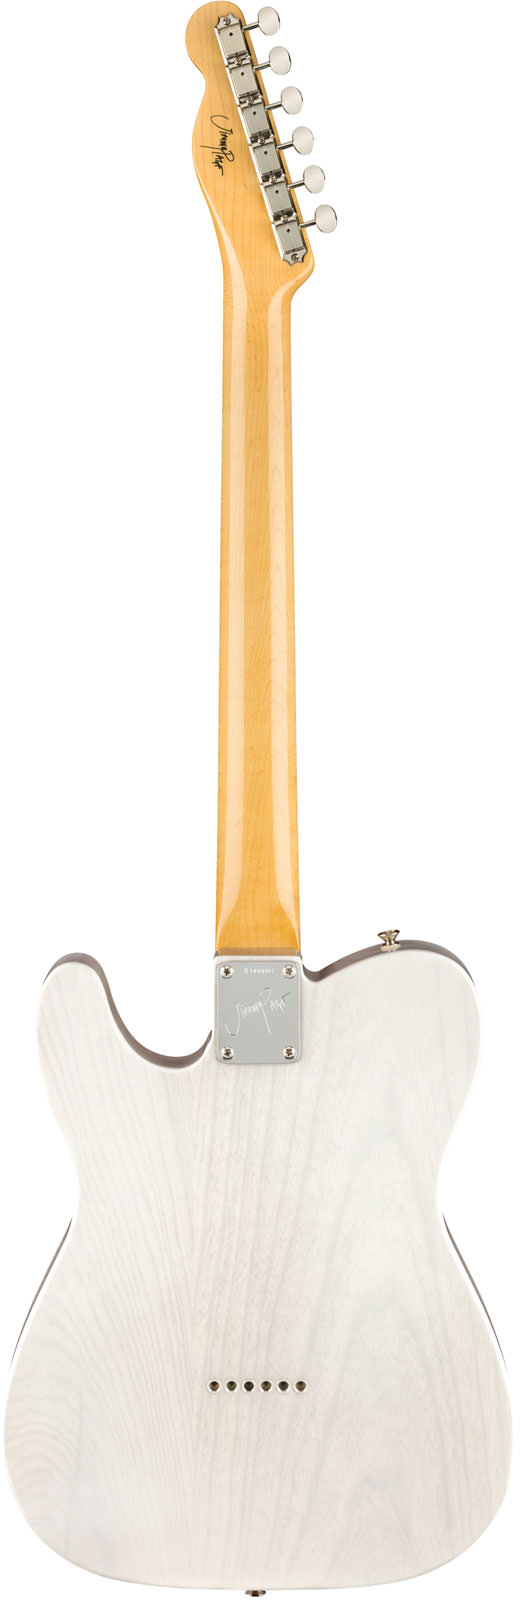 FENDER JIMMY PAGE Telecaster MIRROR RW White Blonde – фото 2